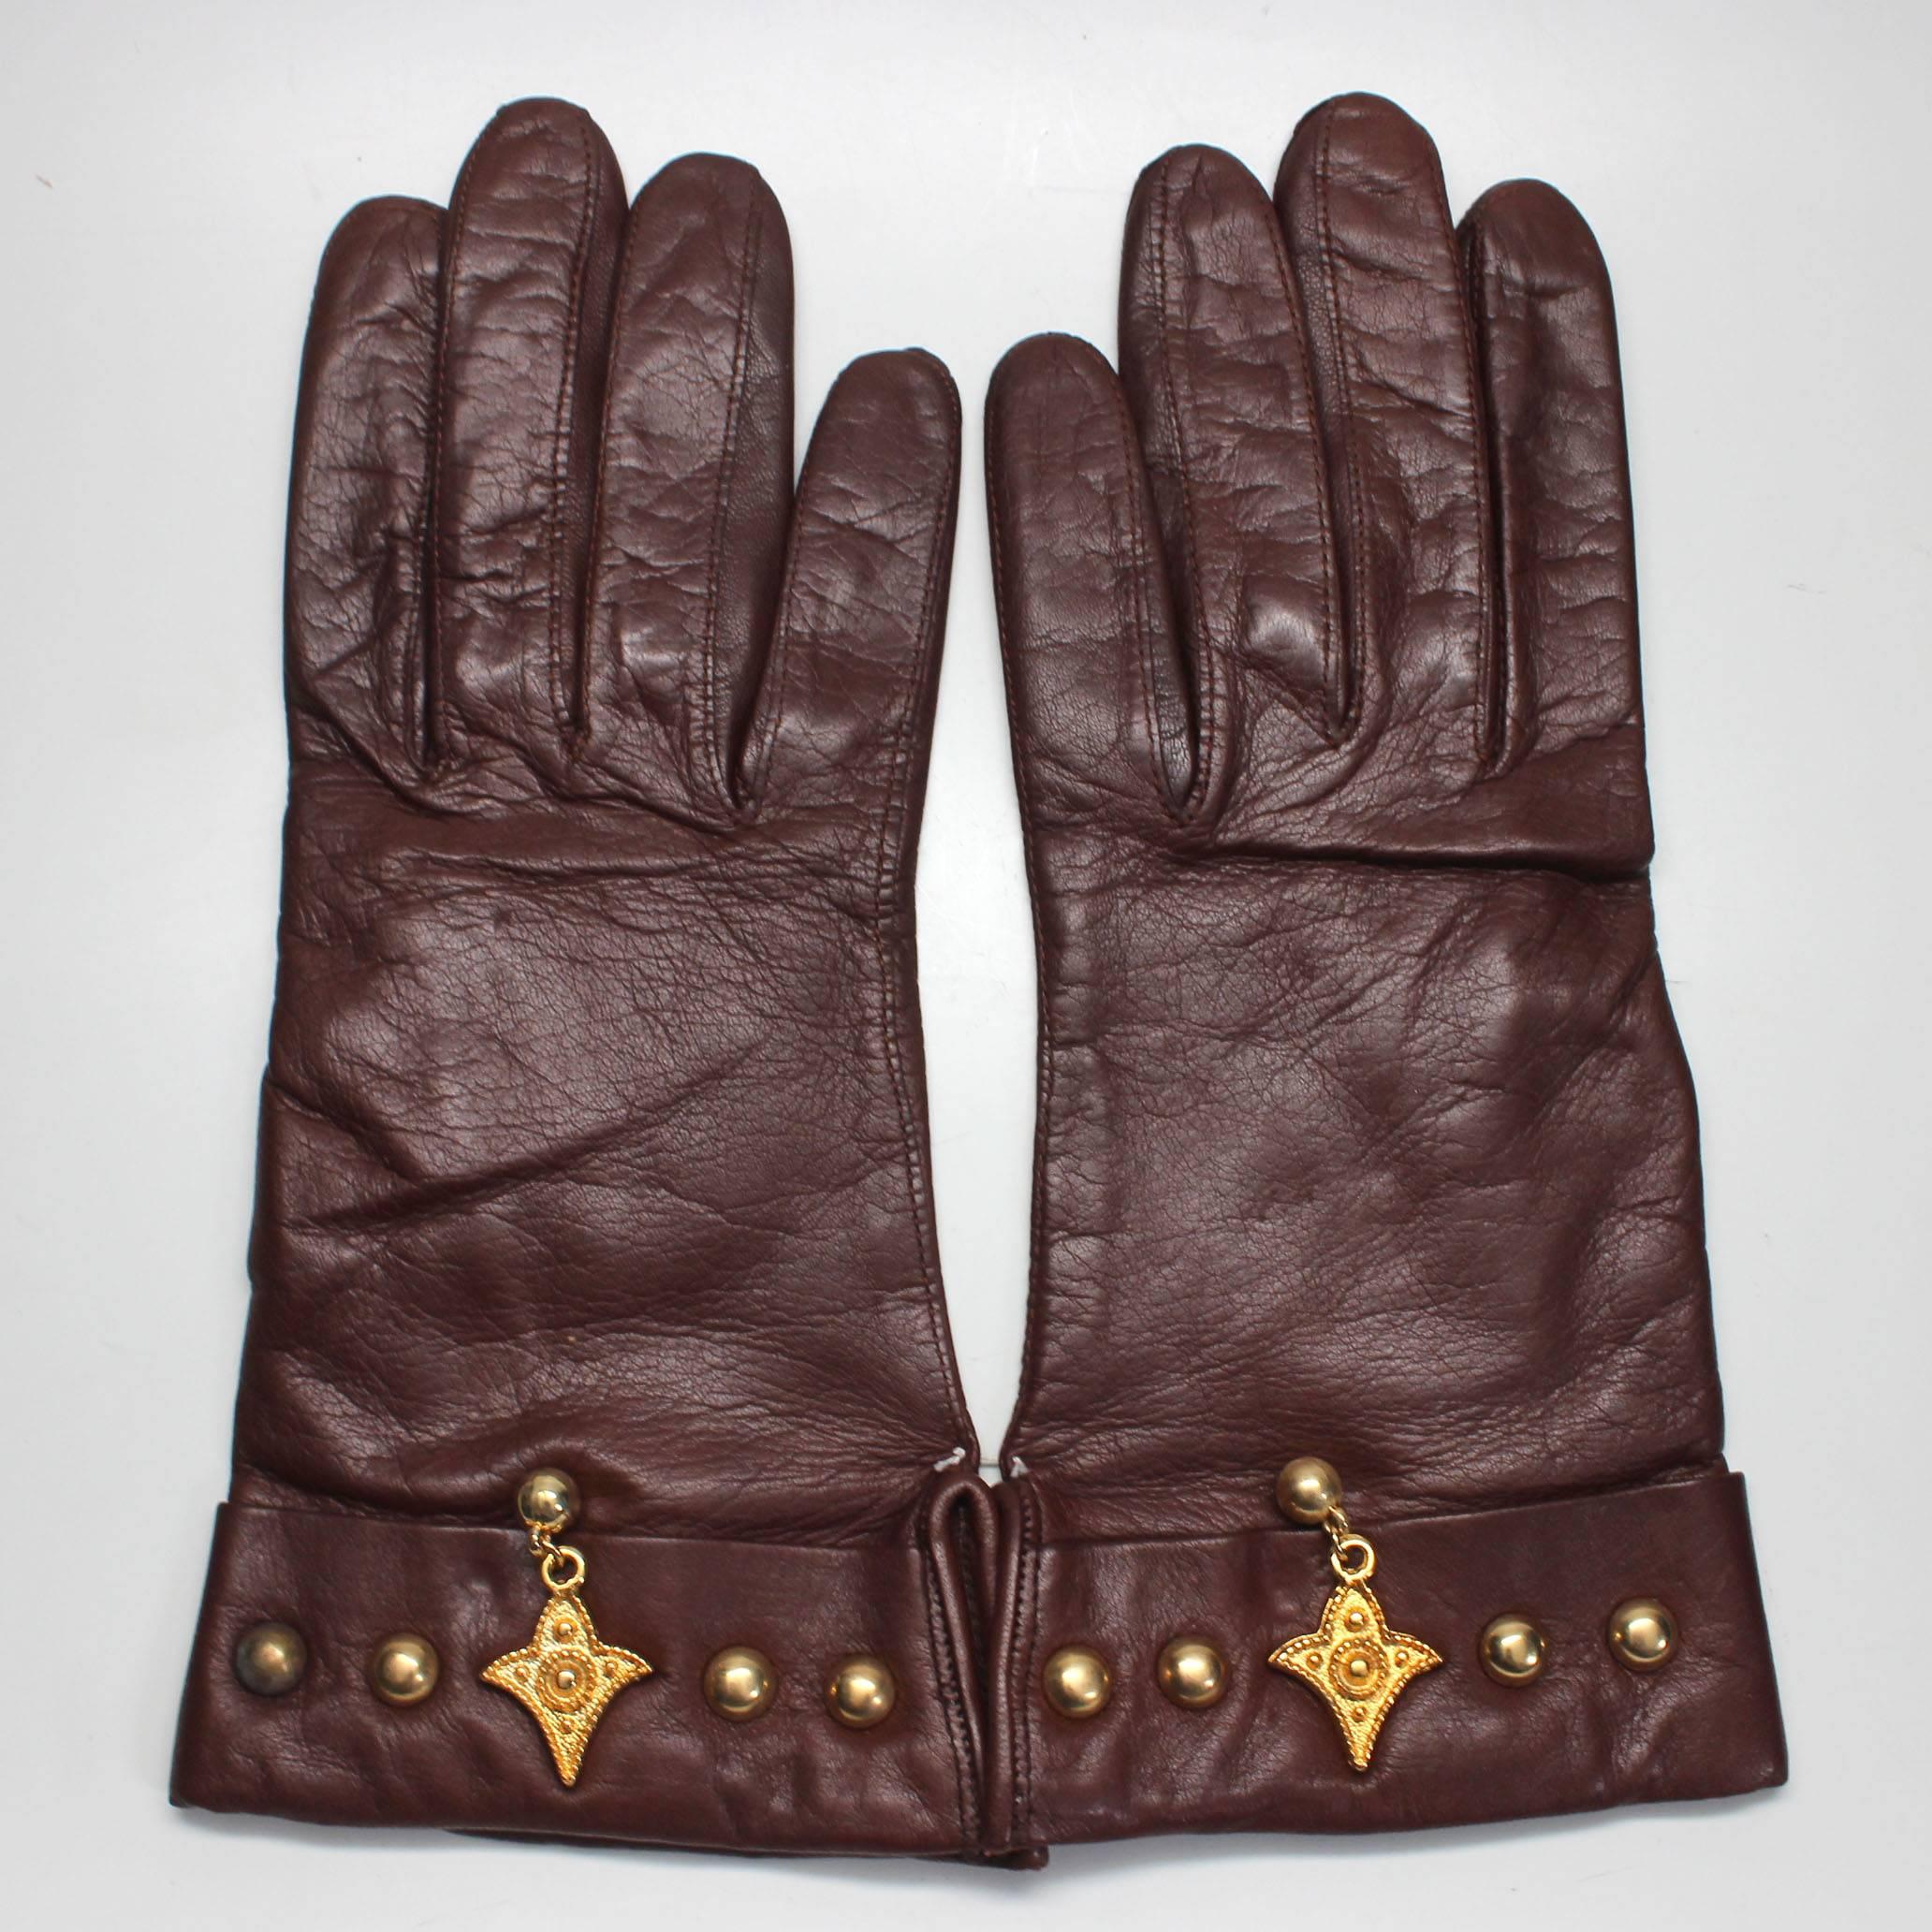 These soft leather gloves are the ideal Escada 80's accessory. This is a pair of never worn brown leather gloves with gold studs and charm at the wrist. The original Escada tag is attached, size 7.